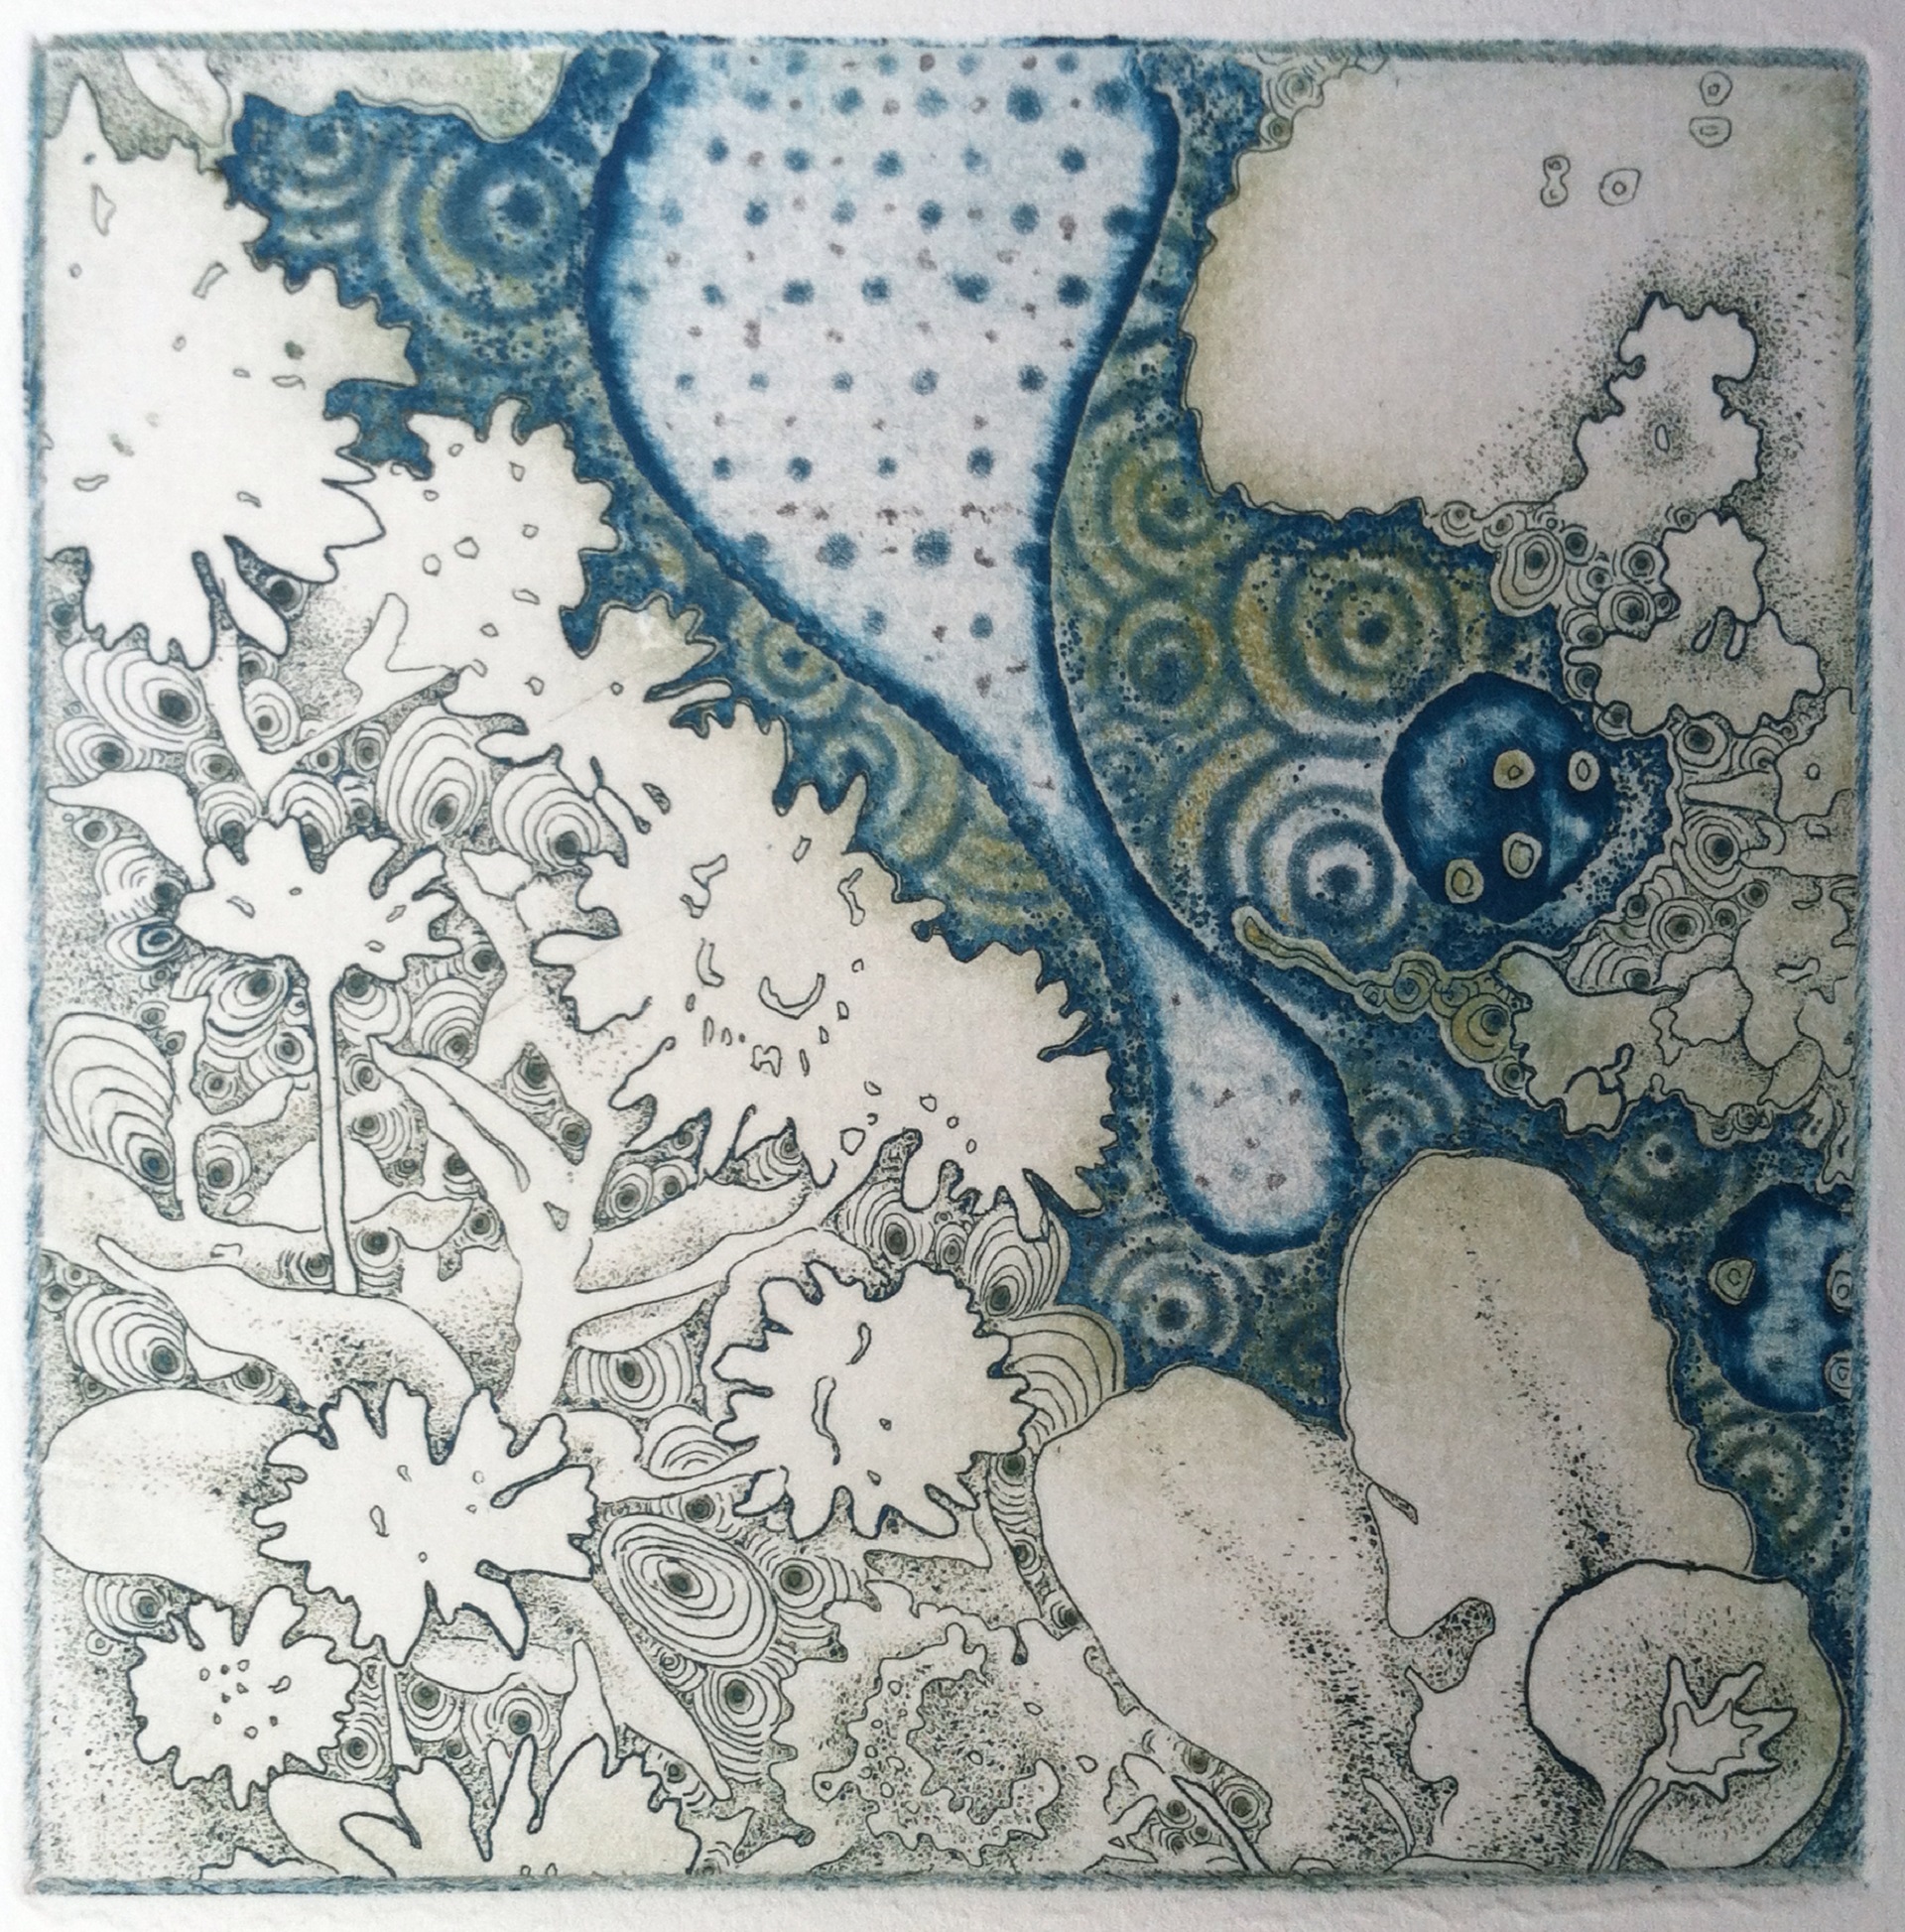 Joshua butler, Liminal: Of Daisies and the Quantum Field, 4"X4" Intaglio